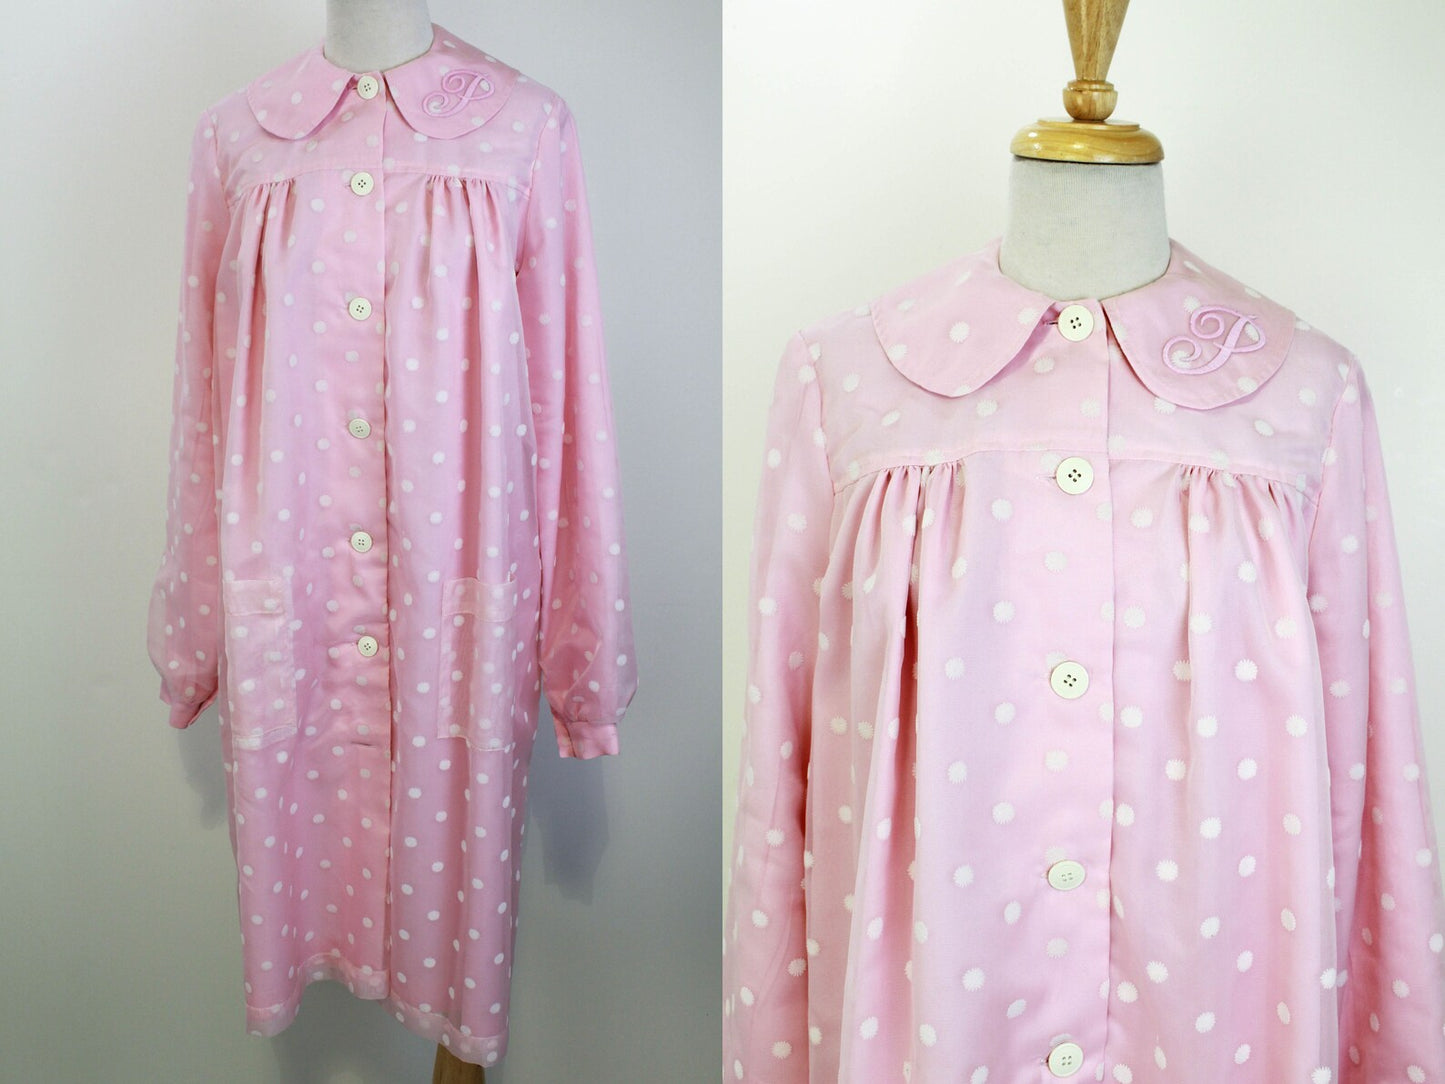 60s-Style Pink Flower Dress Jacket, Pinky's Uniform from Hairspray, Embroidered P Initial